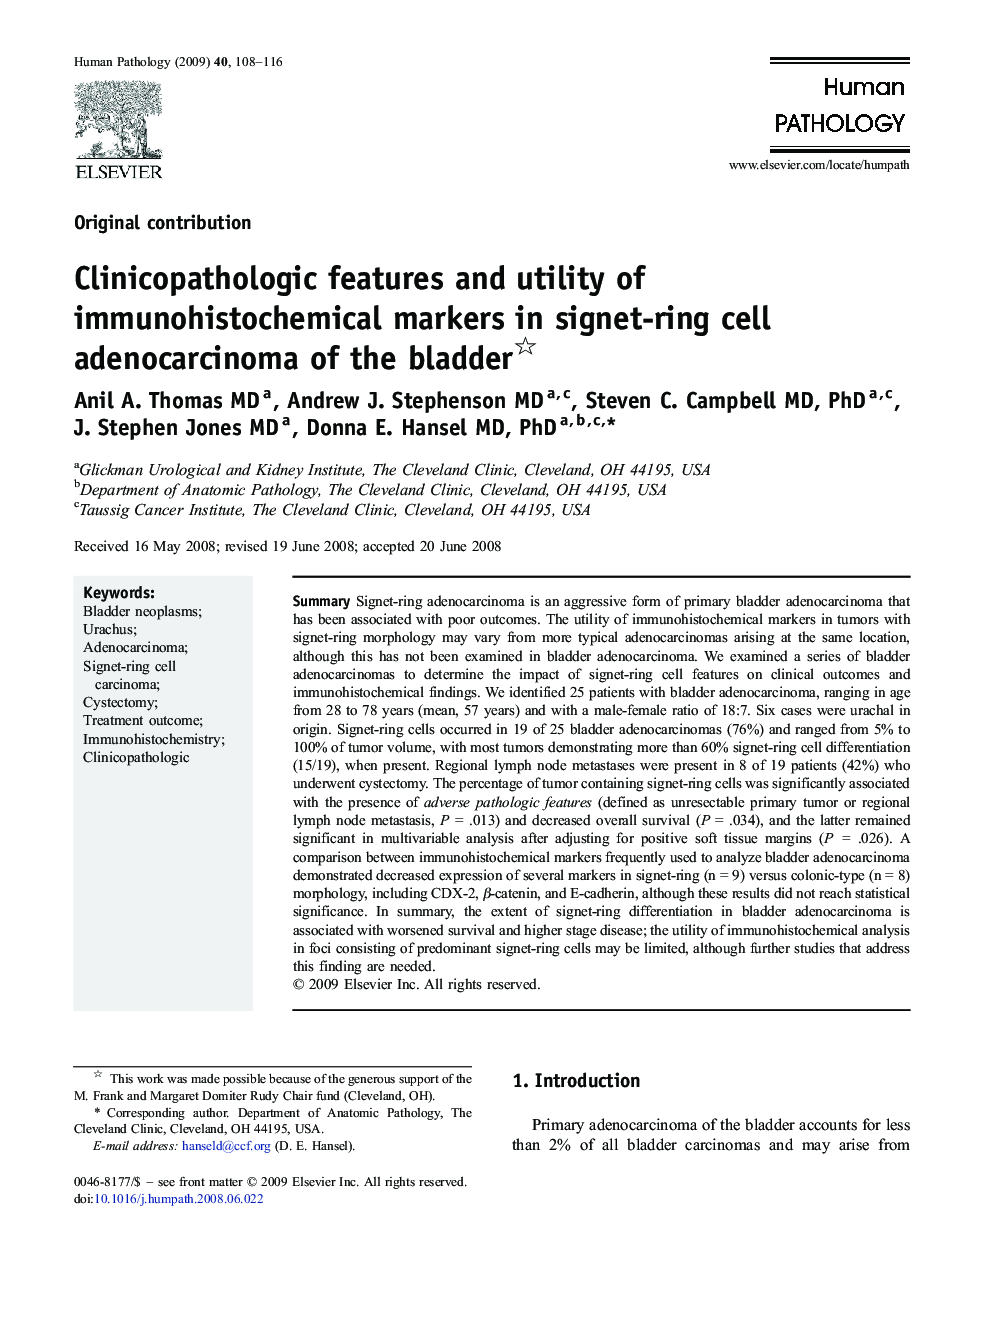 Clinicopathologic features and utility of immunohistochemical markers in signet-ring cell adenocarcinoma of the bladder 